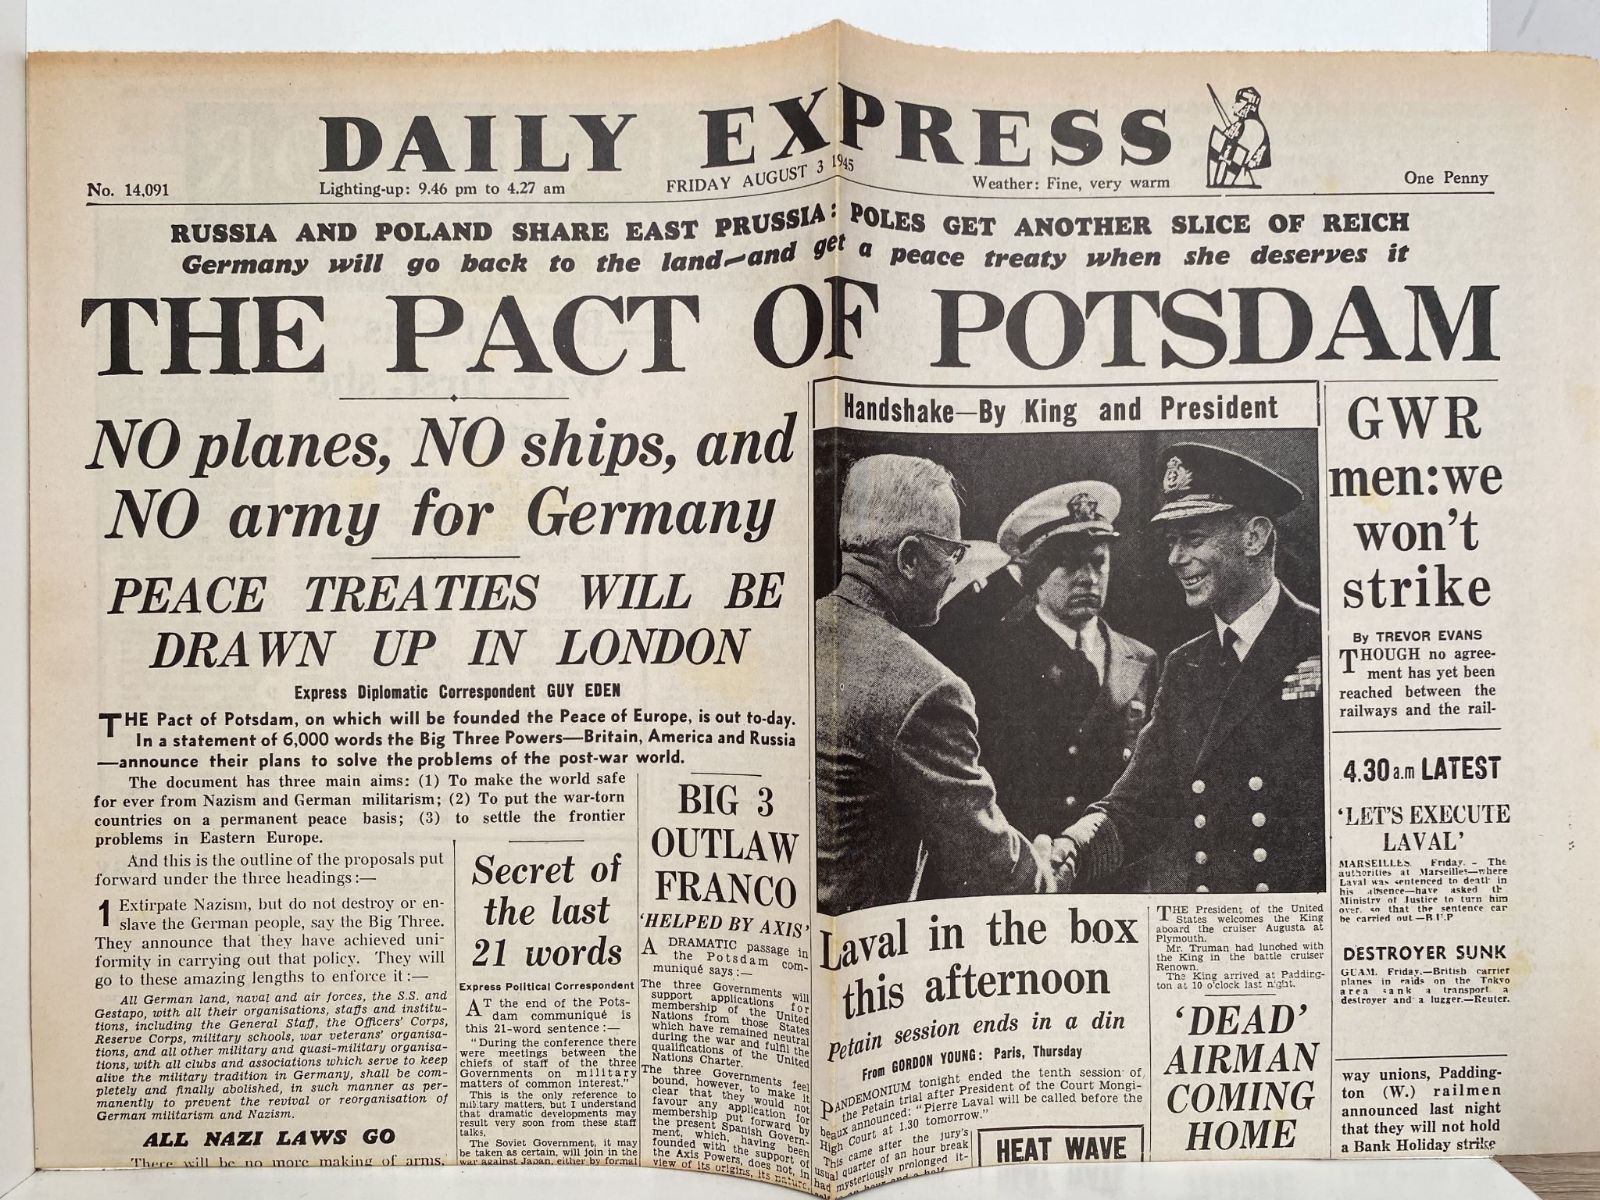 OLD WARTIME NEWSPAPER: Daily Express, Friday 3rd August 1945